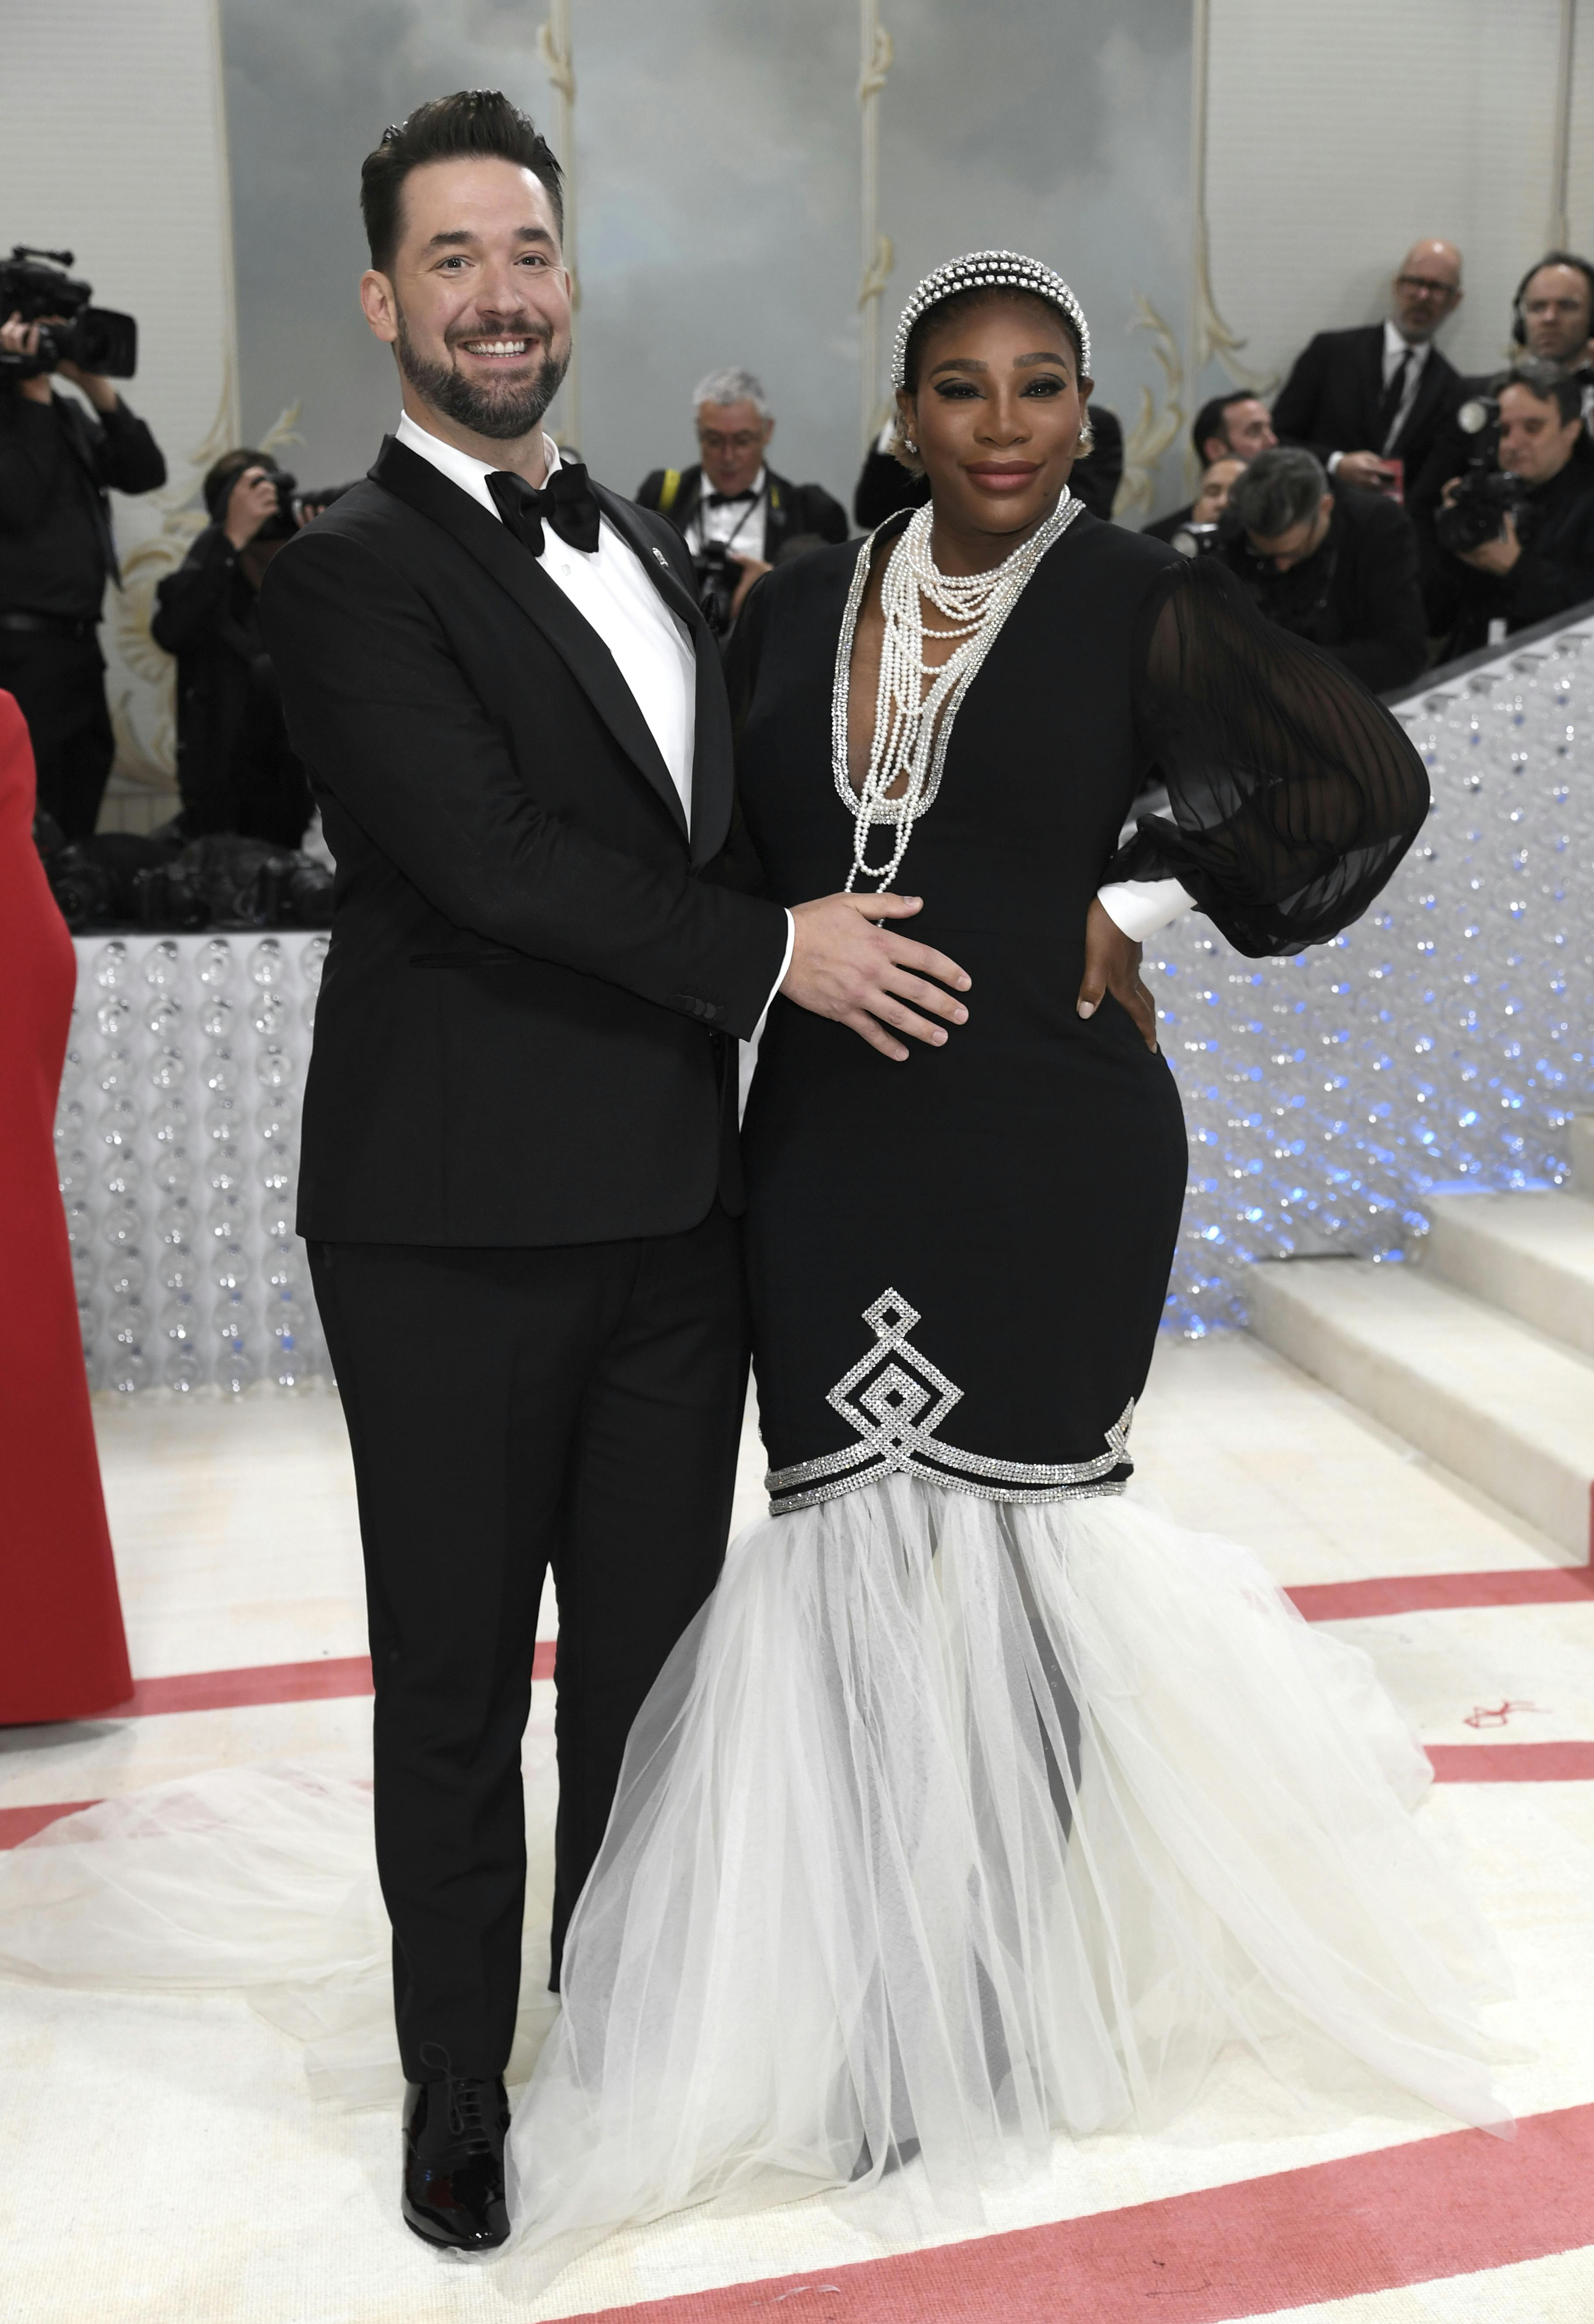 Alexis Ohanian, left, and Serena Williams attend The Metropolitan Museum of Art's Costume Institute benefit gala celebrating the opening of the "Karl Lagerfeld: A Line of Beauty" exhibition on Monday, May 1, 2023, in New York. (Photo by Evan Agostini/Invision/AP)